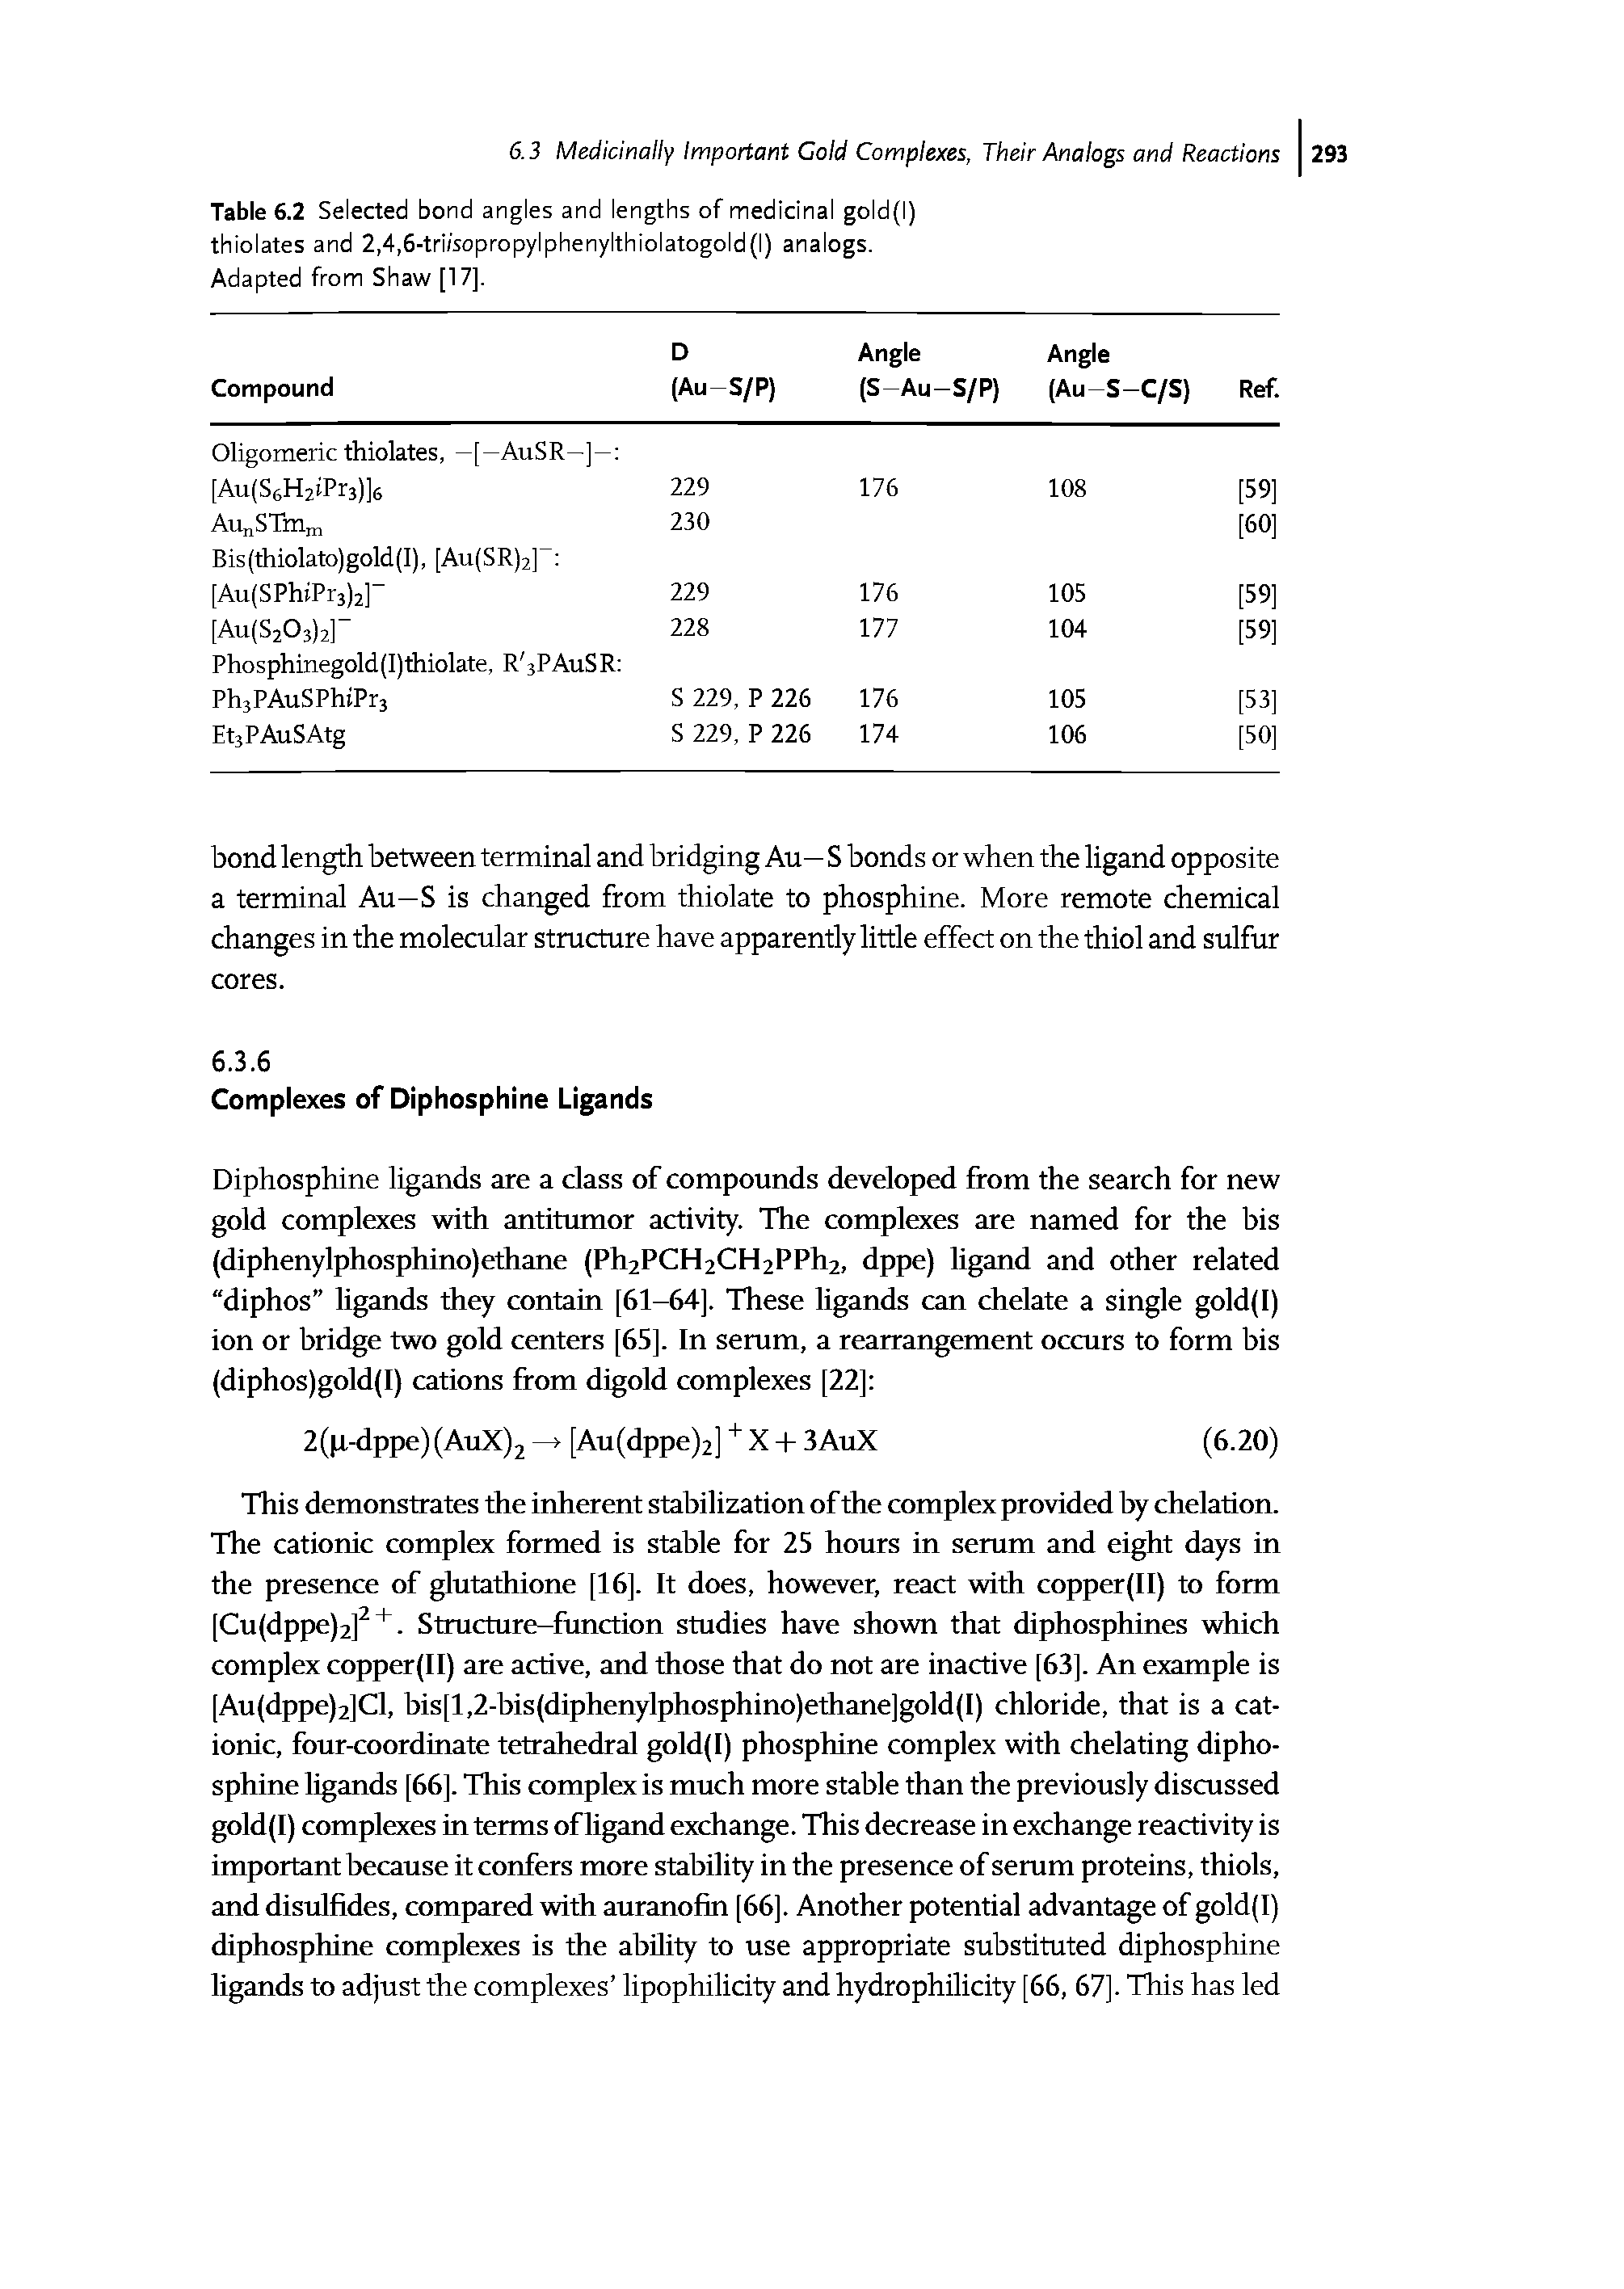 Table 6.2 Selected bond angles and lengths of medicinal gold(l) thiolates and 2,4,6-tri/sopropylphenylthiolatogold(l) analogs. Adapted from Shaw [17],...